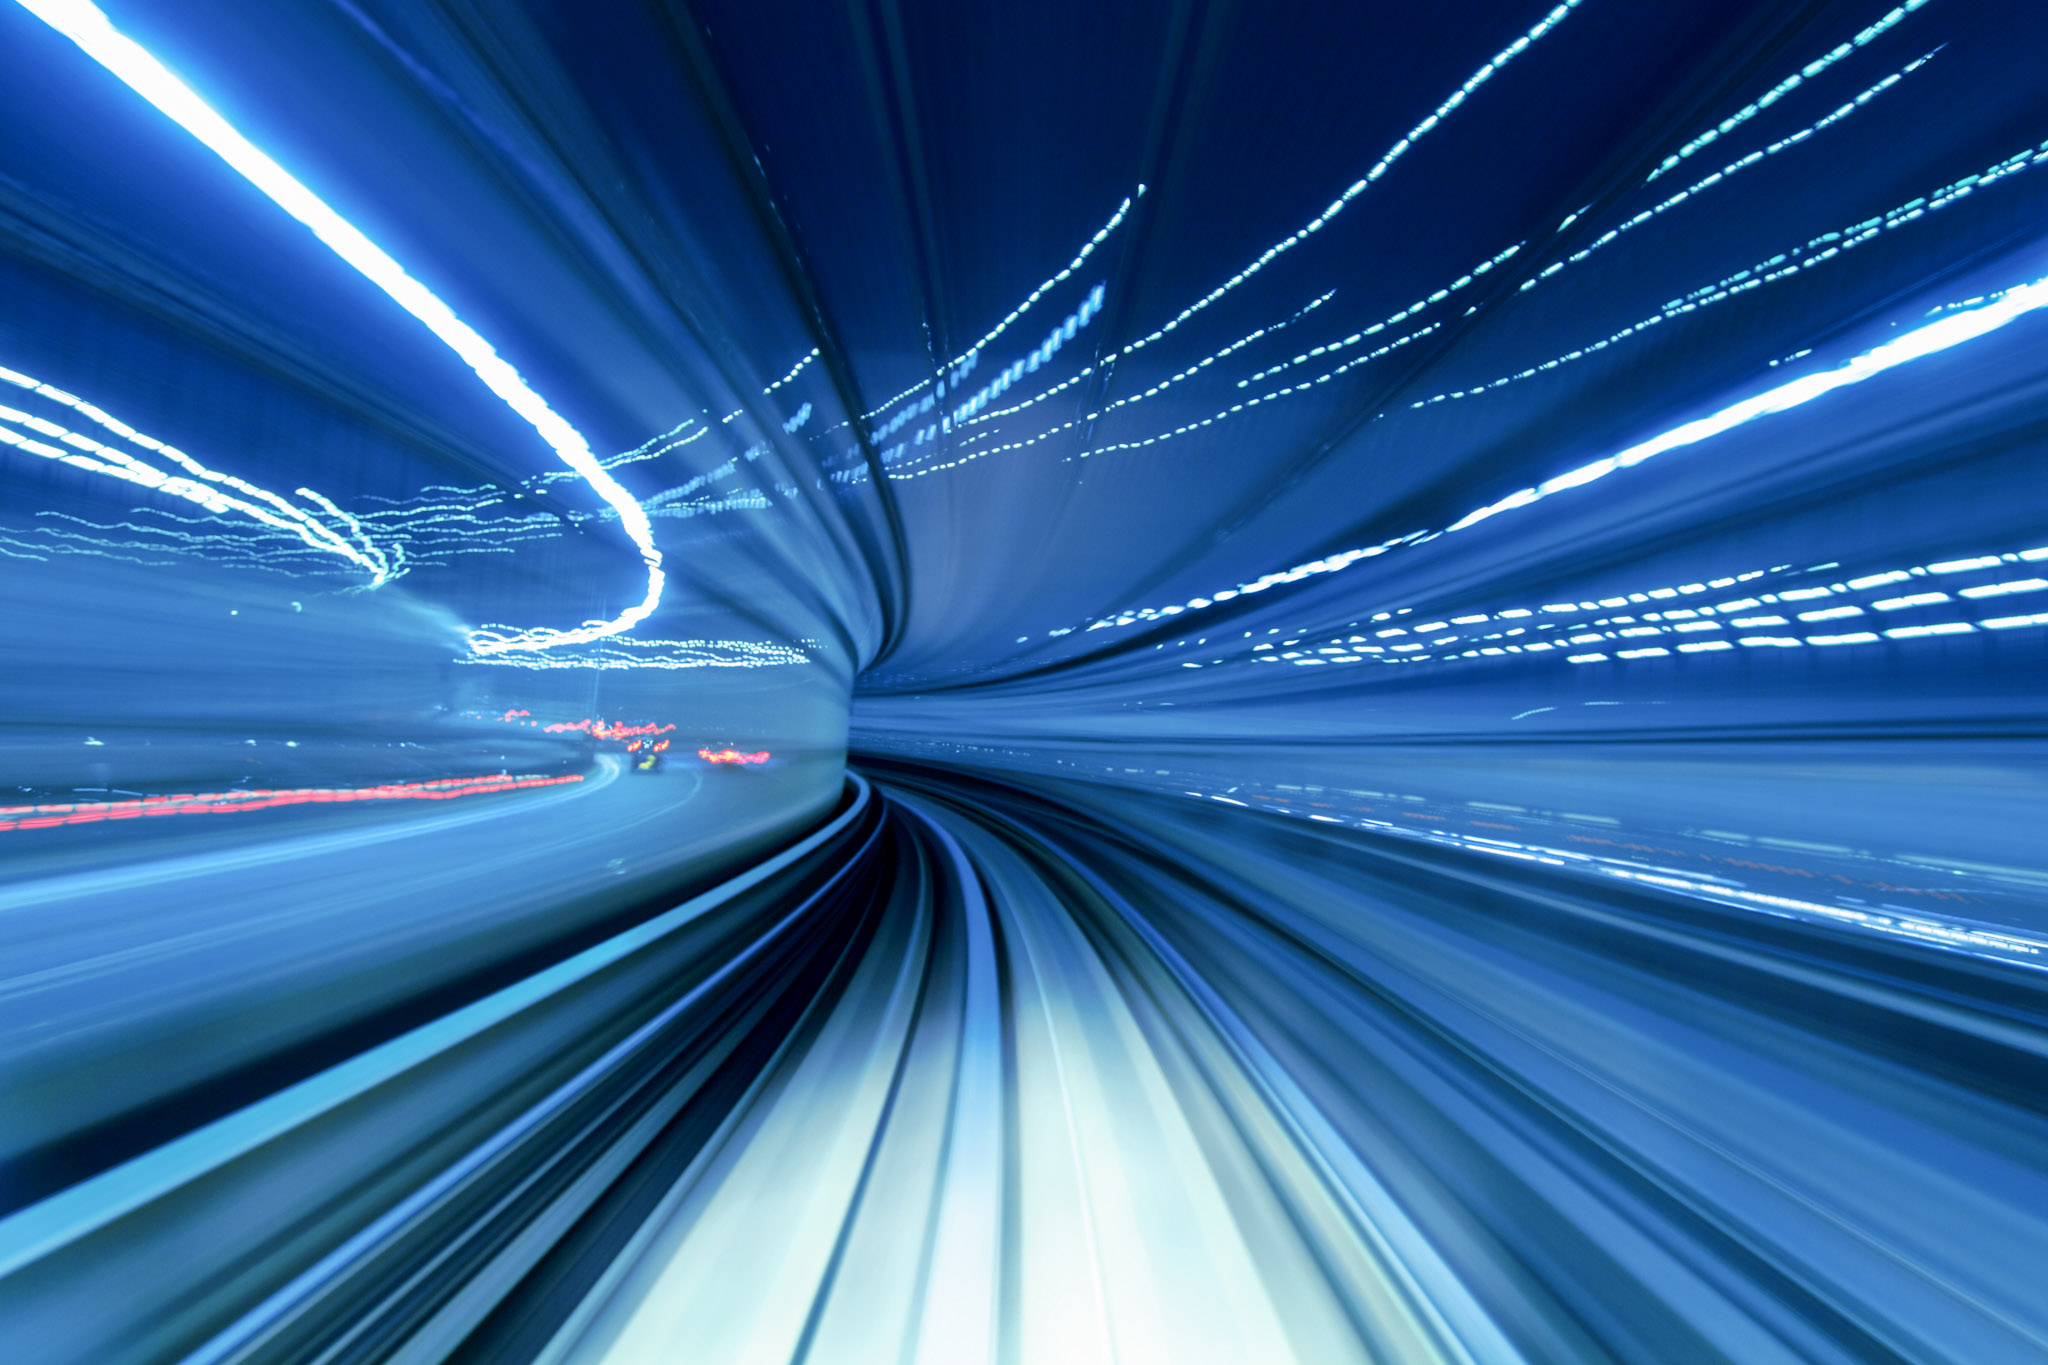 stock photo of generic whizzy blue lines intended to evoke concepts of speed